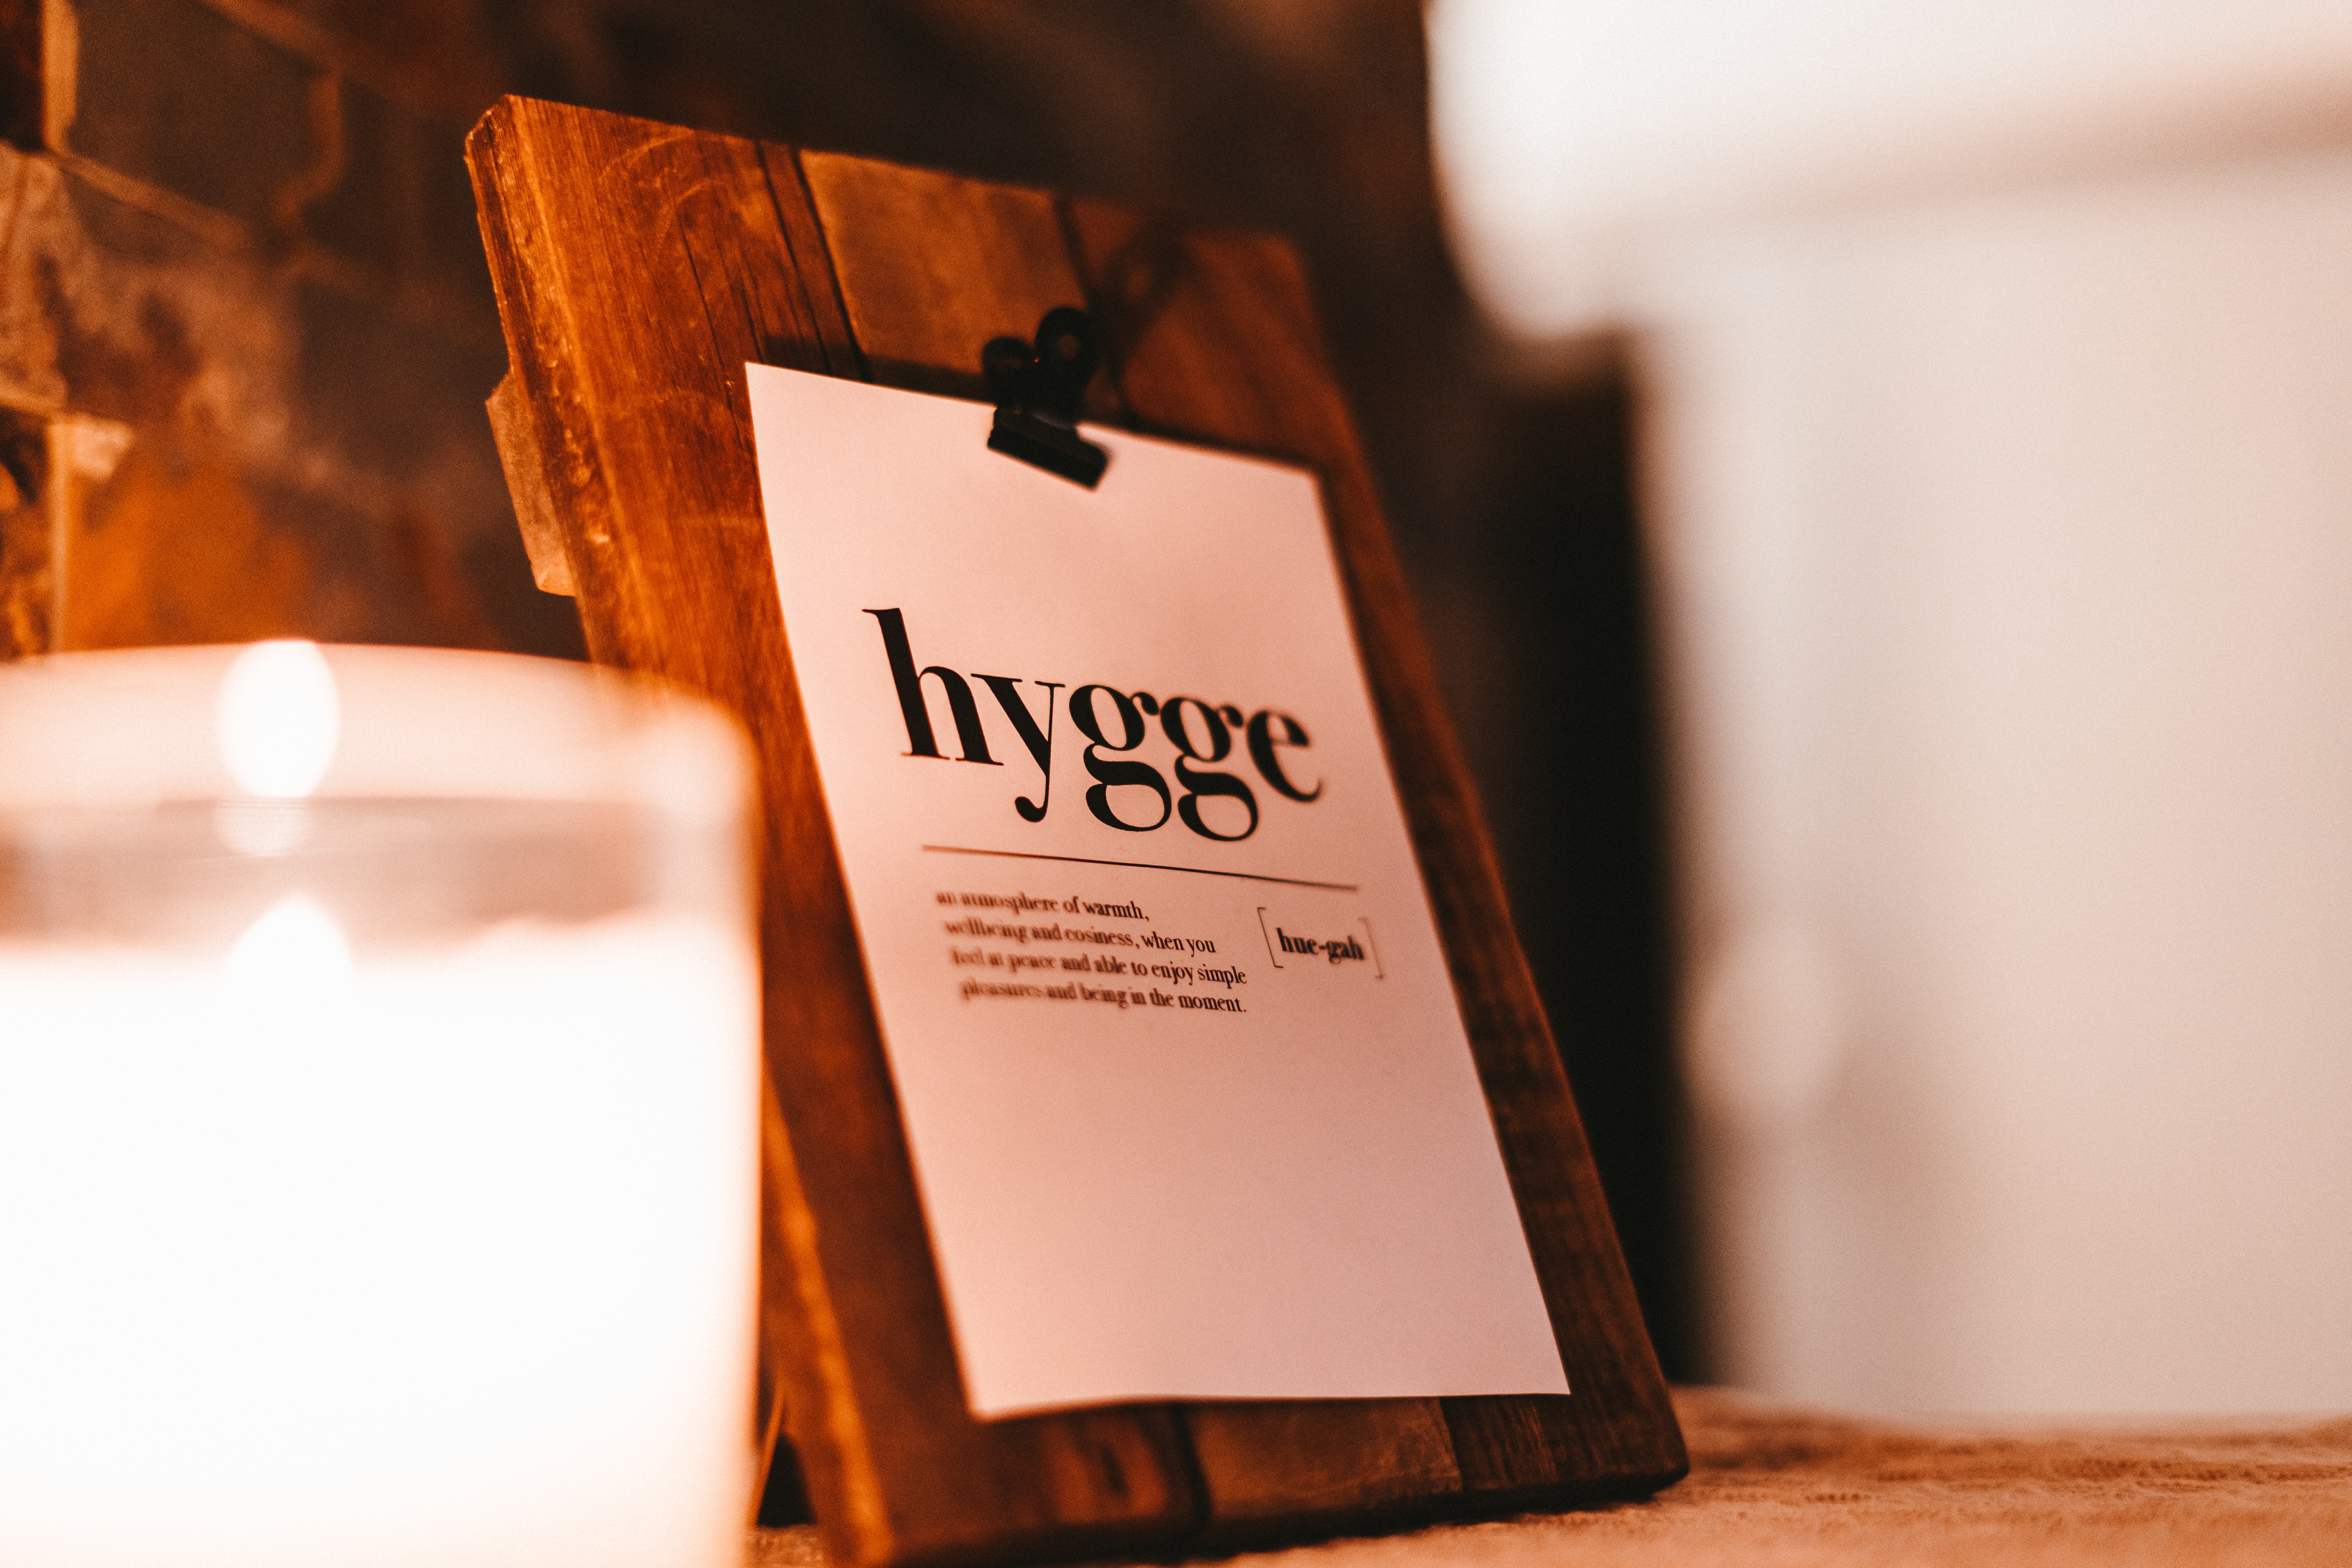 Hygge is a Danish word and concept that roughly translates to a feeling of coziness and contentment, as well as a sense of well-being that is achieved through the enjoyment of simple, little things in life. It is a popular cultural concept as well in Norway.